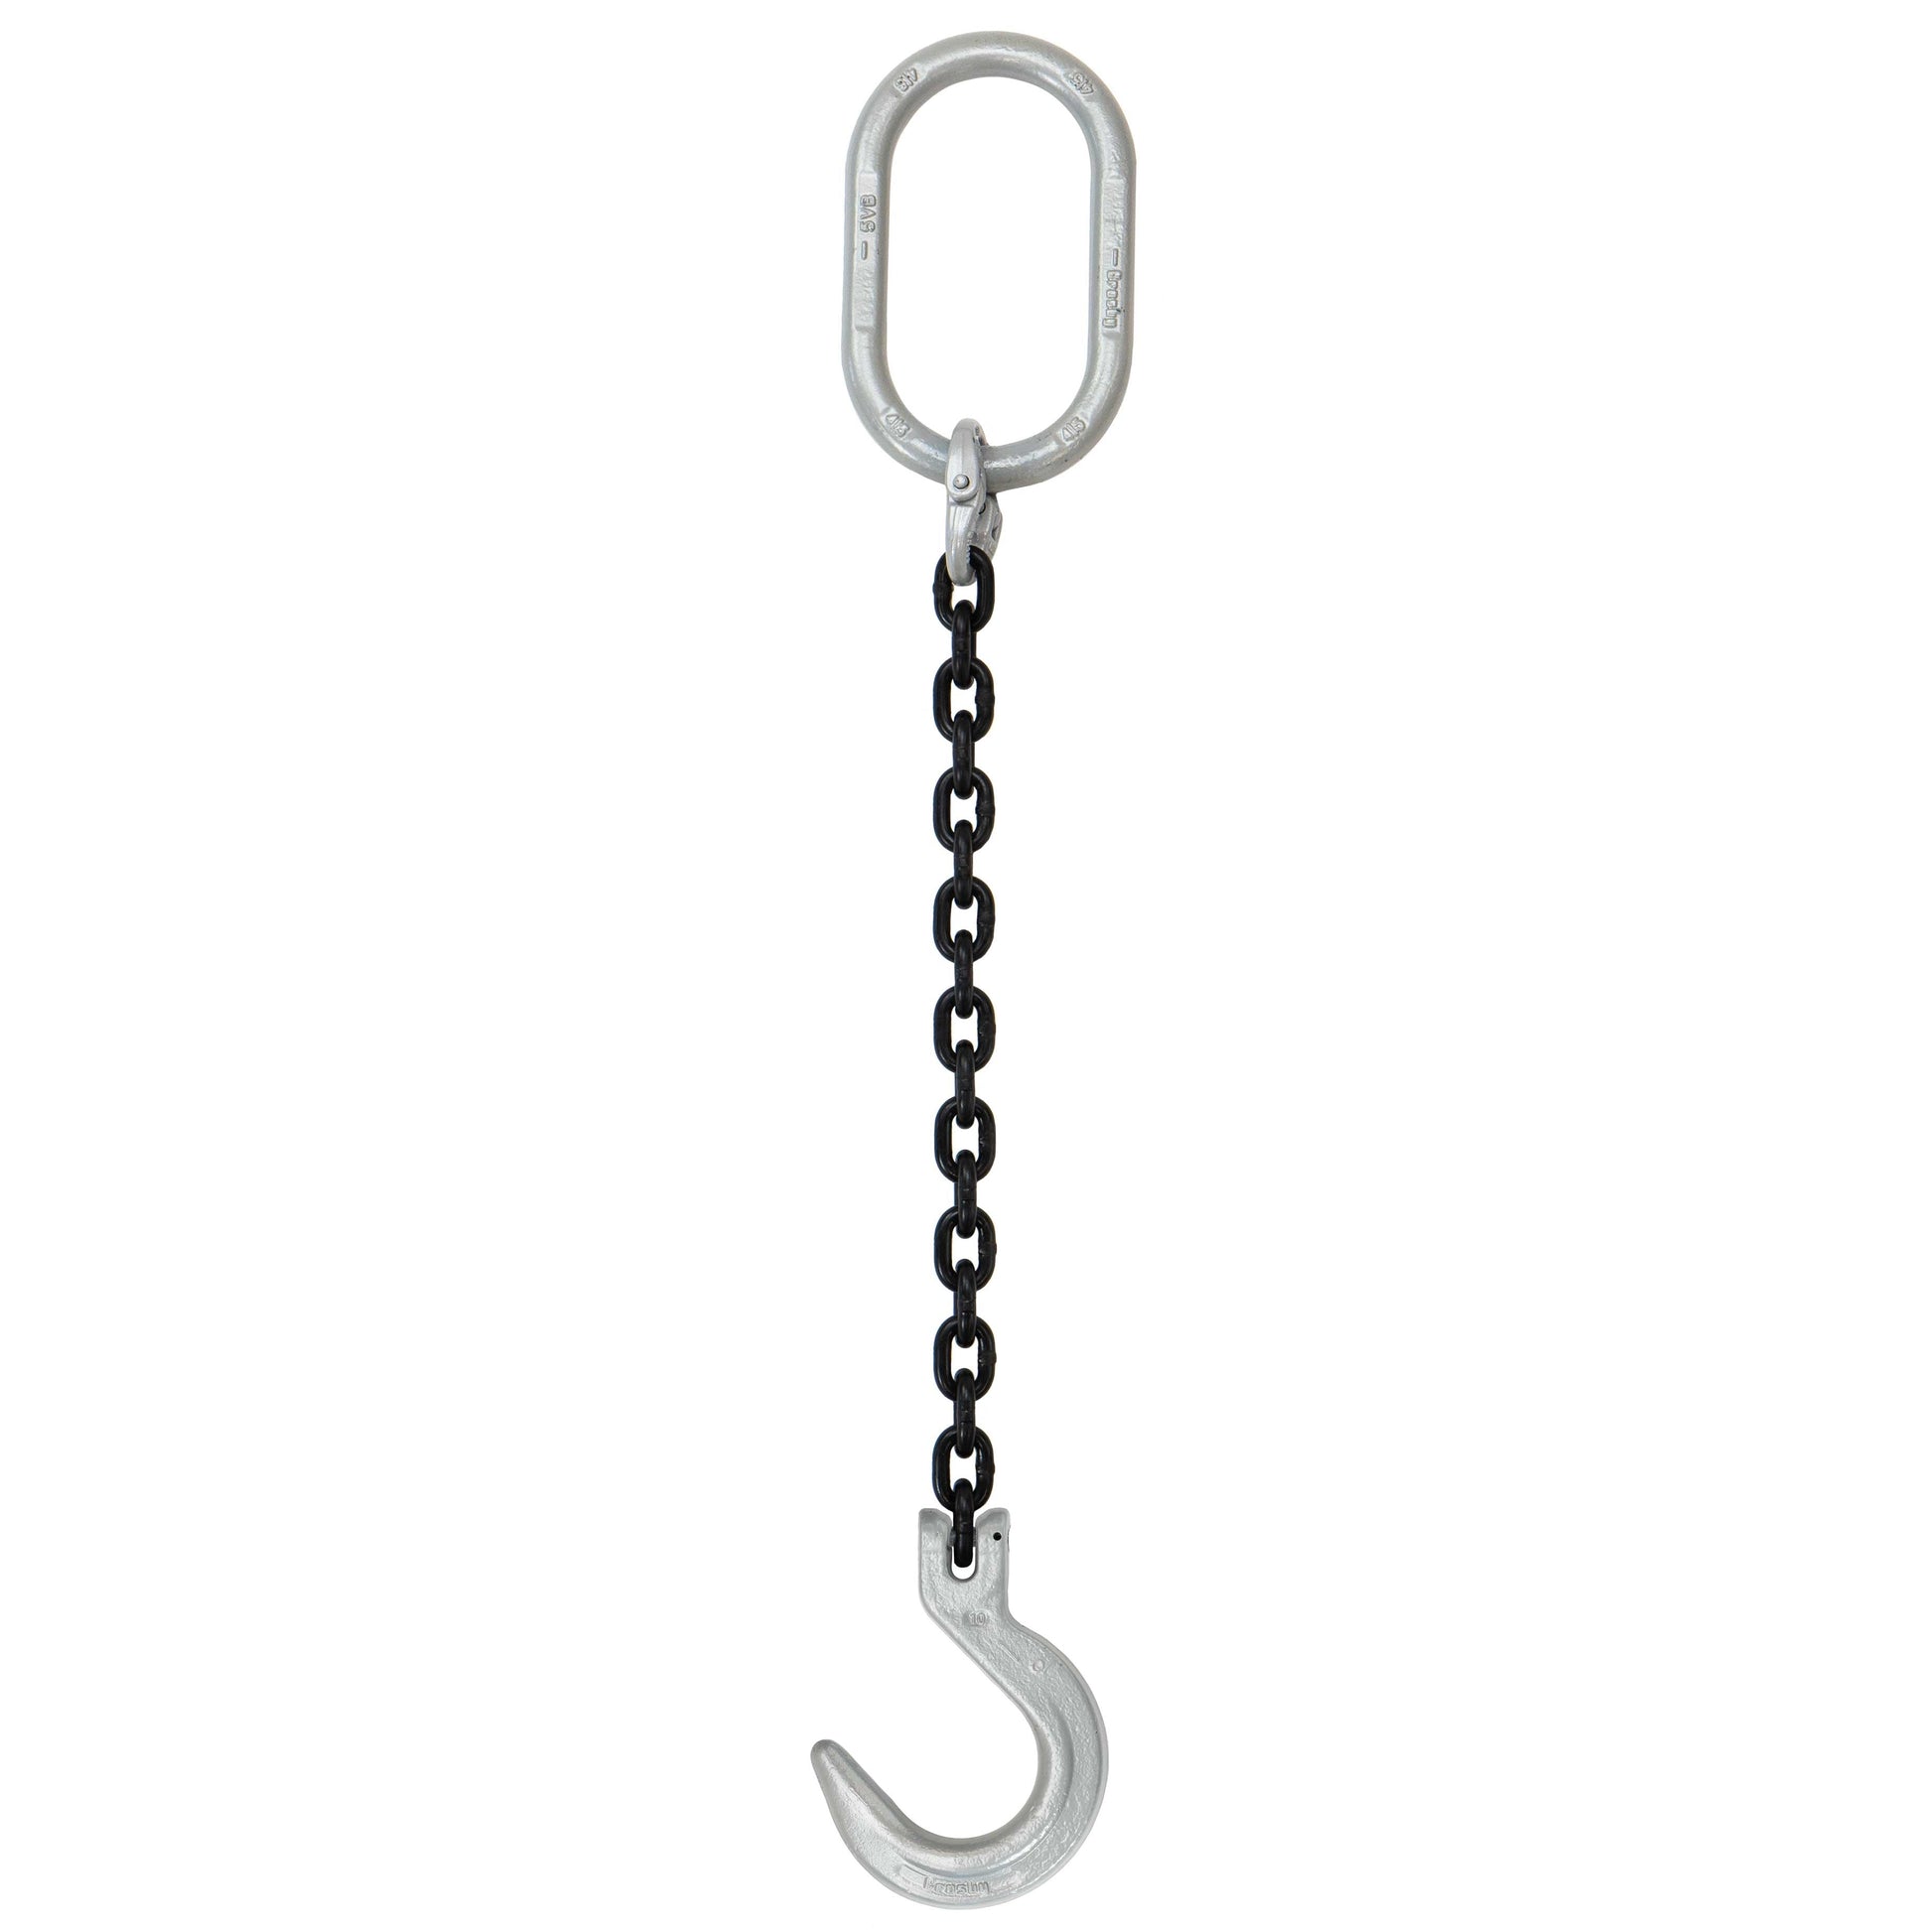 12 inch x 18 foot Domestic Single Leg Chain Sling w Crosby Foundry Hook Grade 100 image 1 of 2